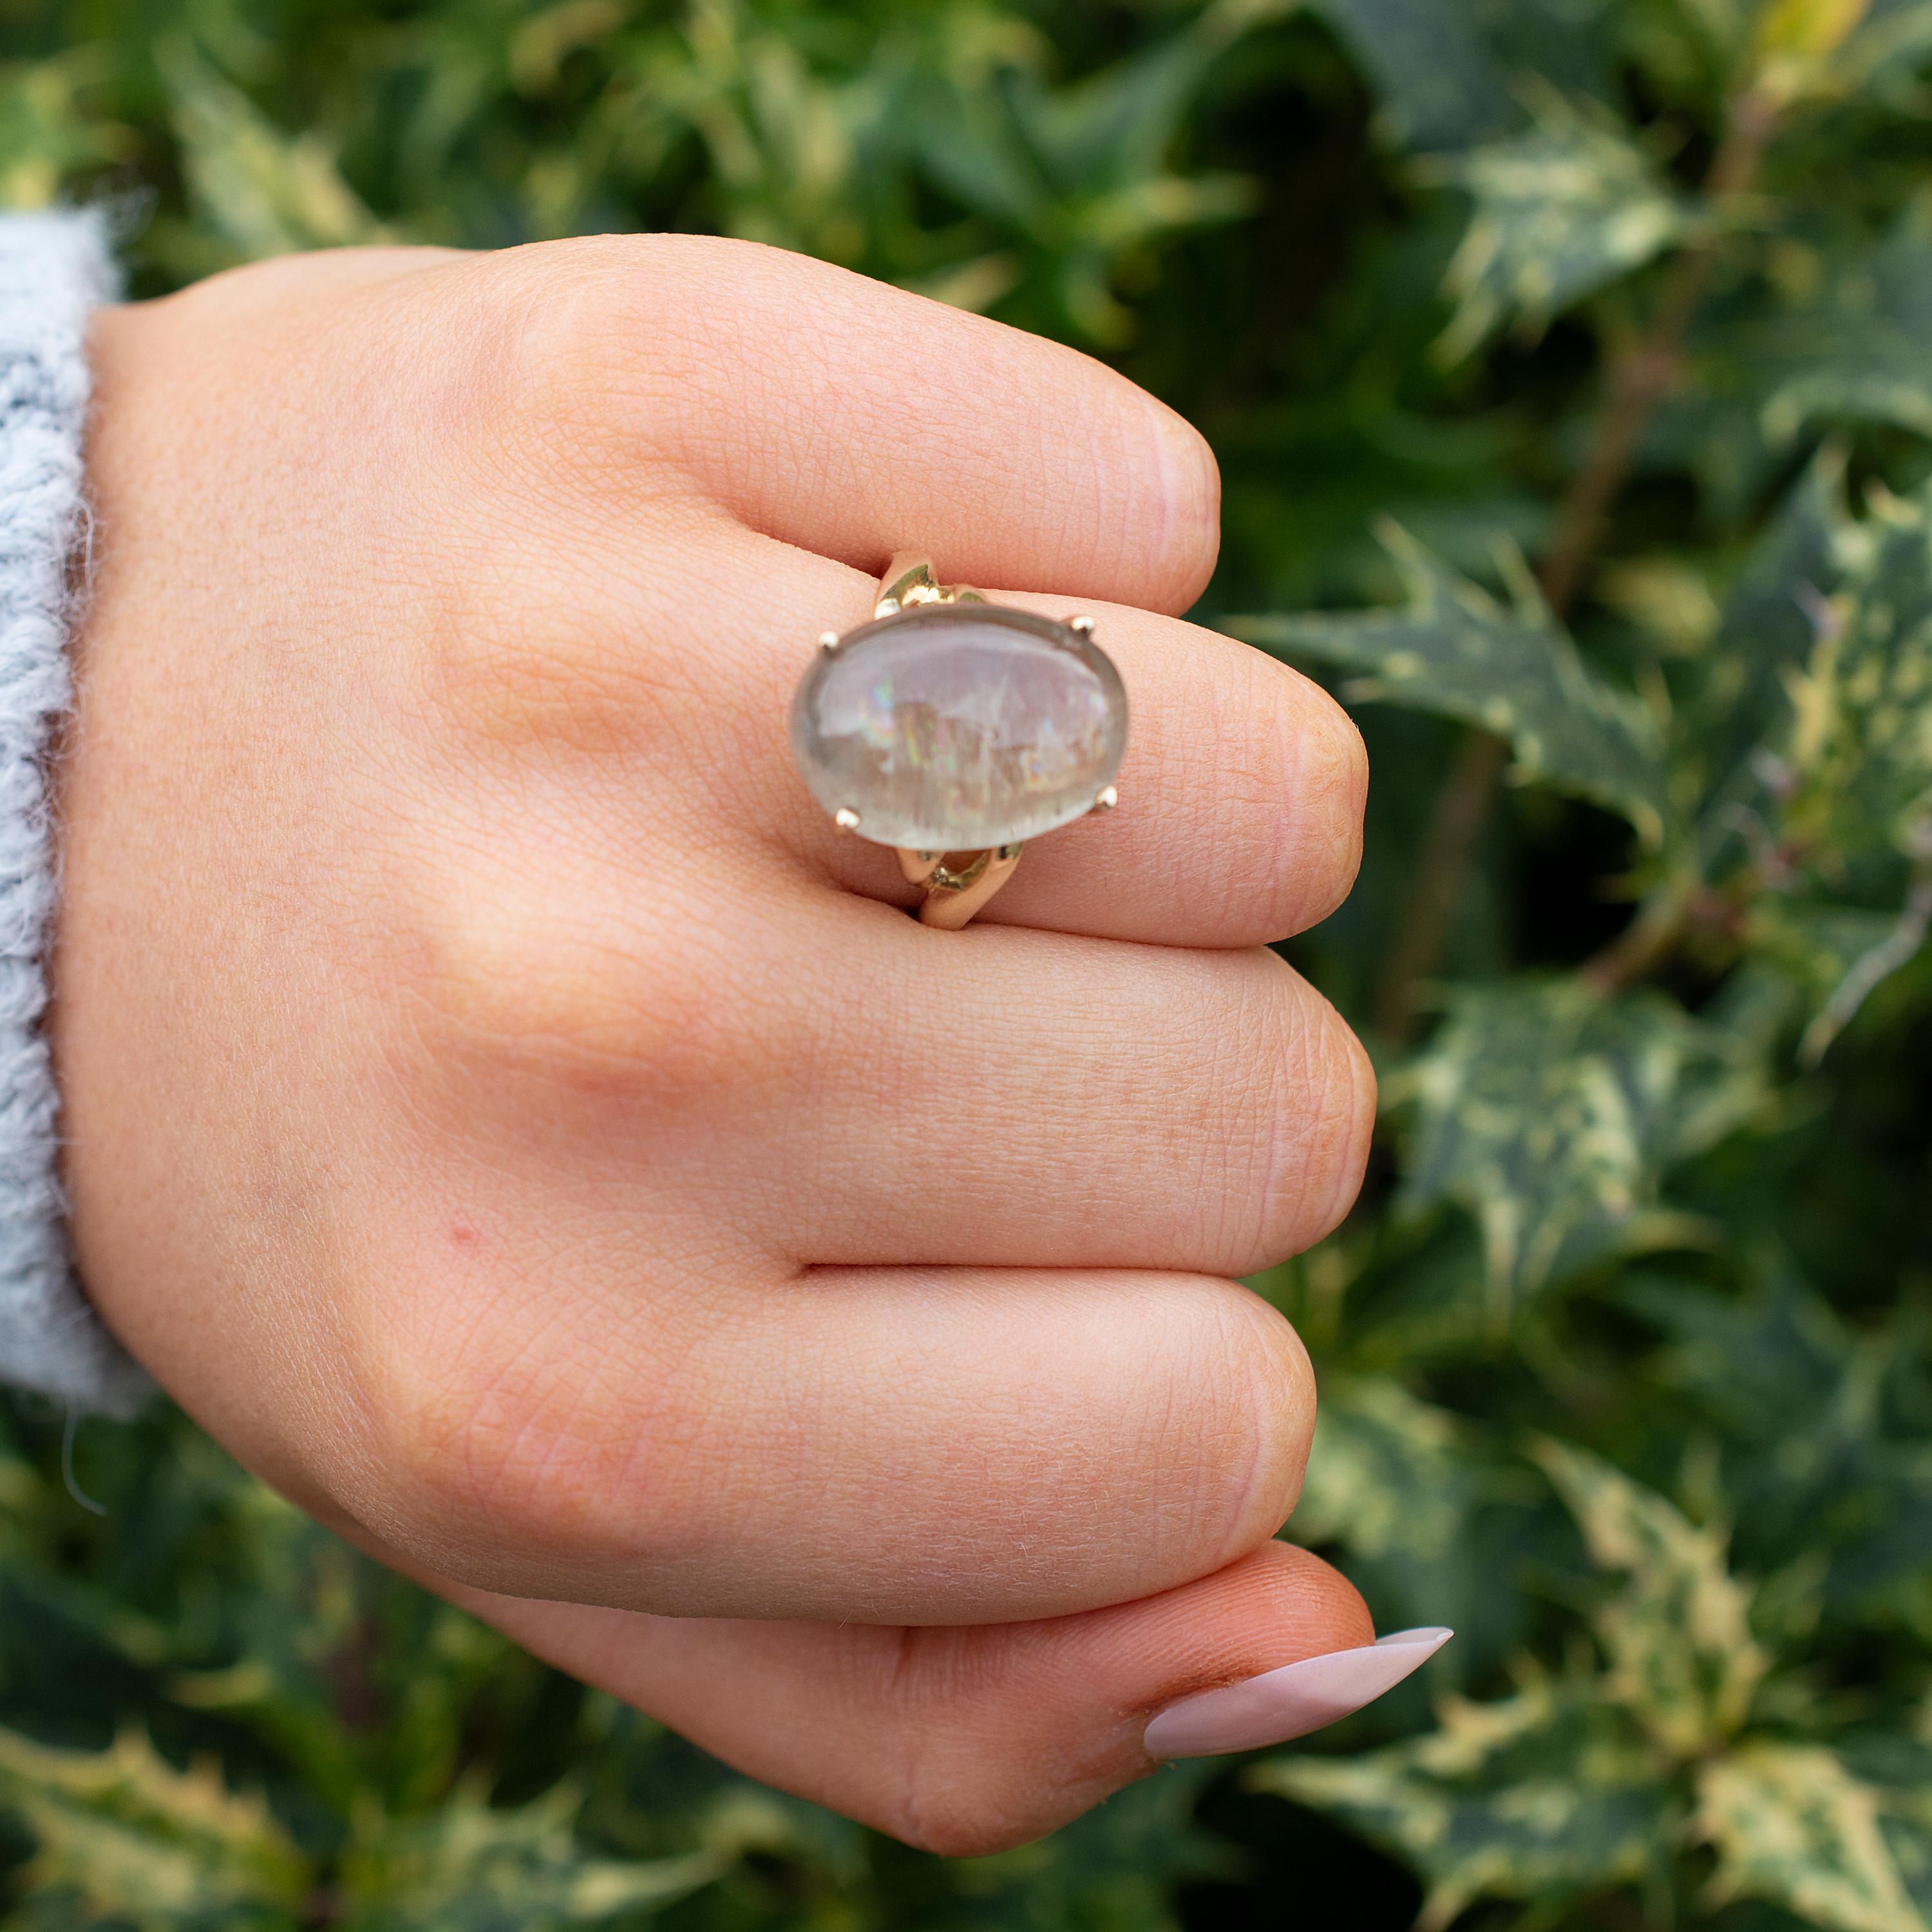 A seductive Rutilated Quartz cocktail ring crafted in 9 karat yellow gold.

The polished stone has a mesmerizing translucent olive green color with golden color inclusions known as ' Rutile'. Rutilated Quartz gemstones are unique in its pattern of